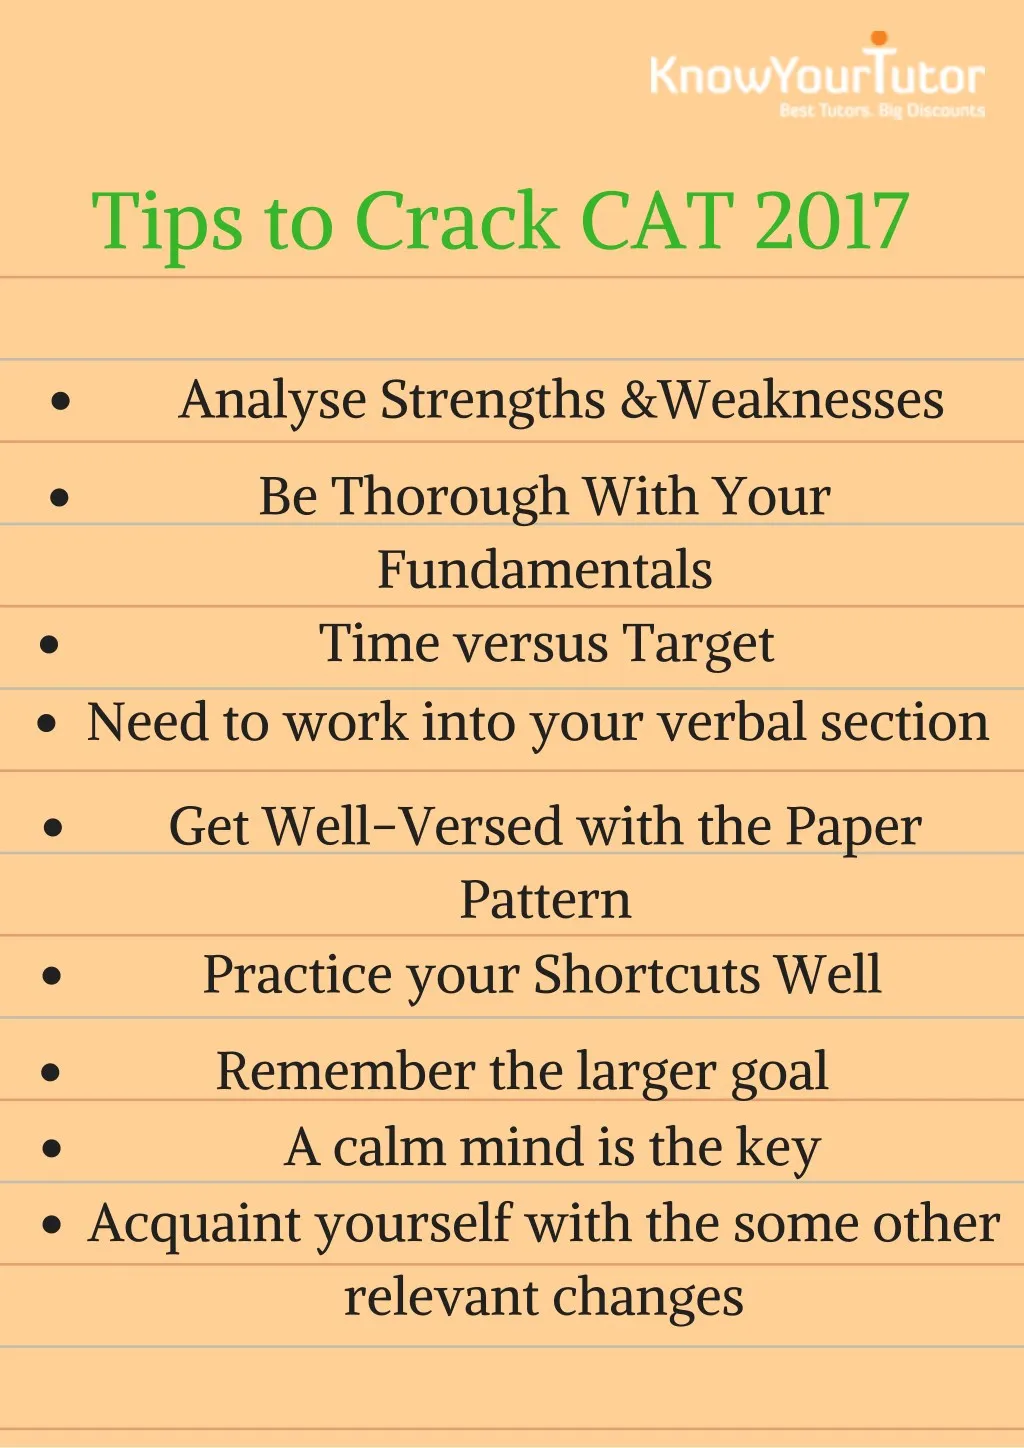 tips to crack cat 2017